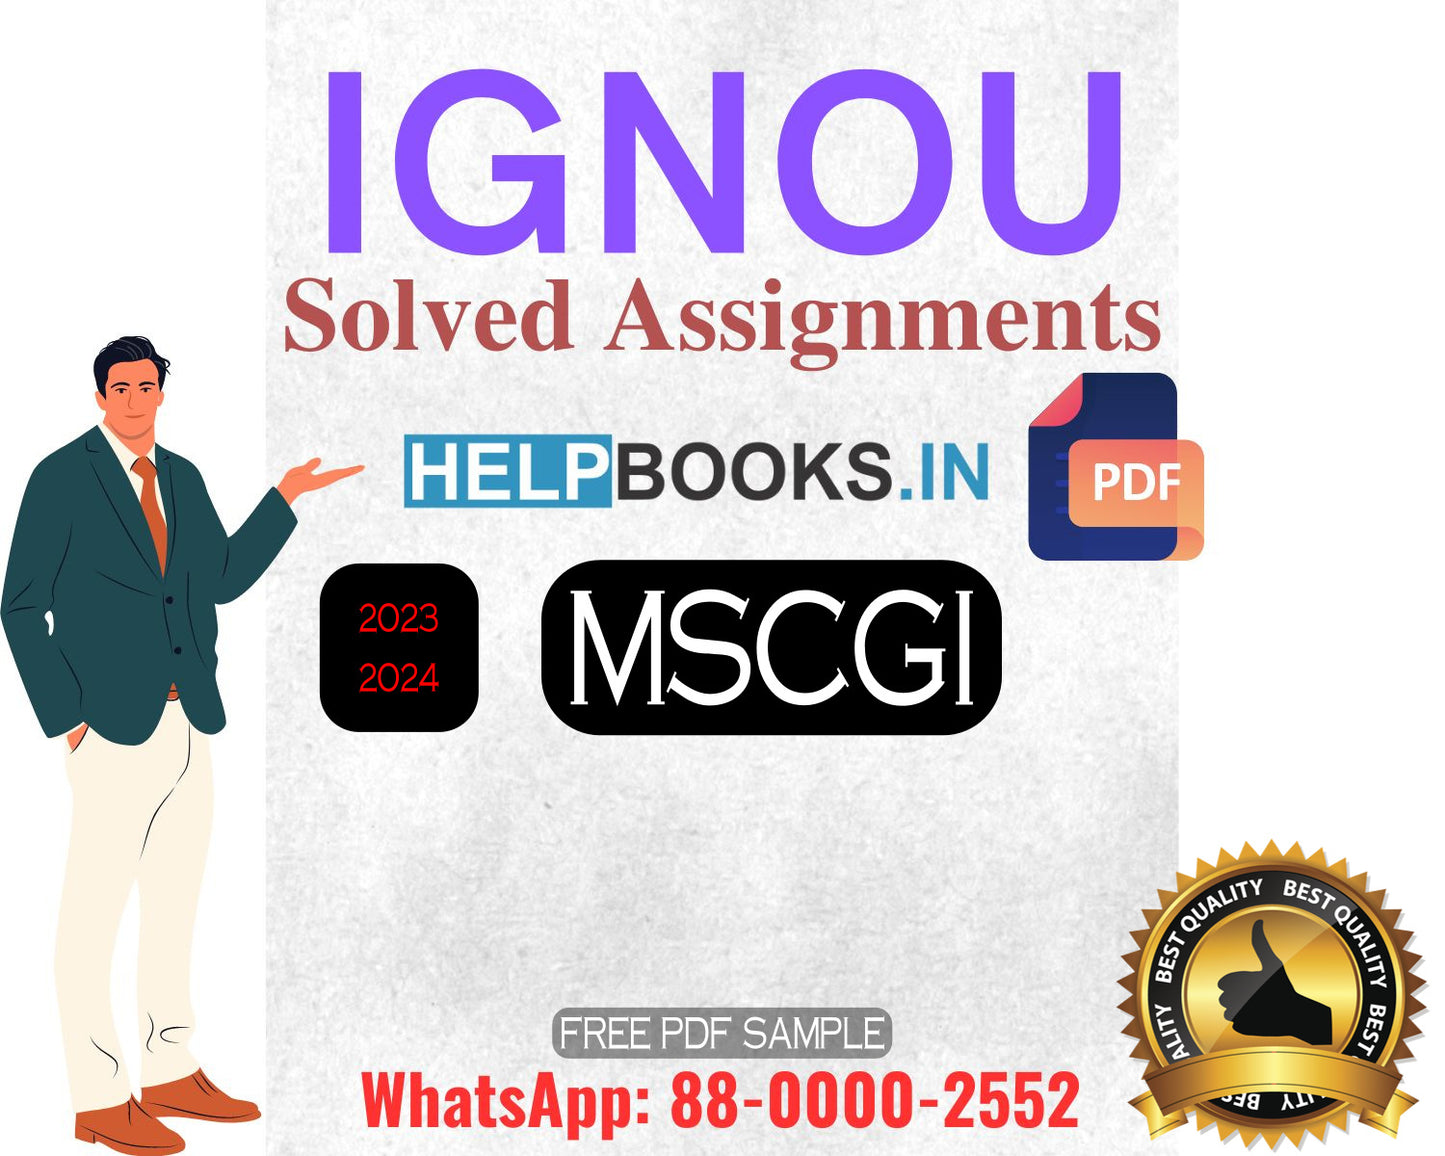 IGNOU Master's Degree Programme Latest IGNOU Solved Assignment 2023-24 : MSCGI Master of Science Geoinformatics Solved Assignments